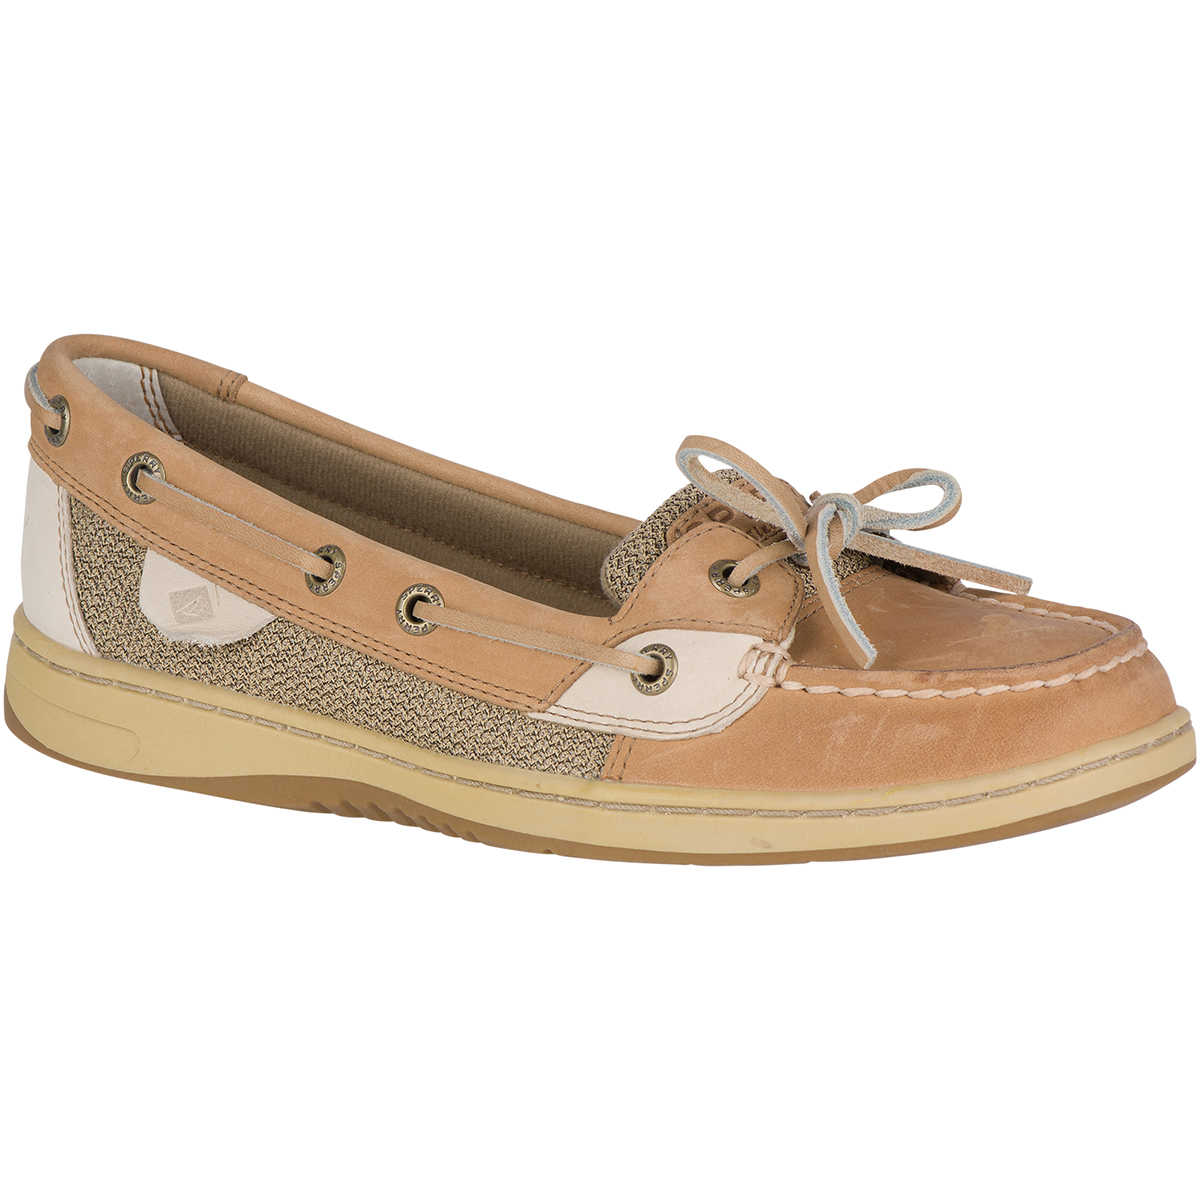 Sperry Women's Angelfish Boat Shoes - Size 10